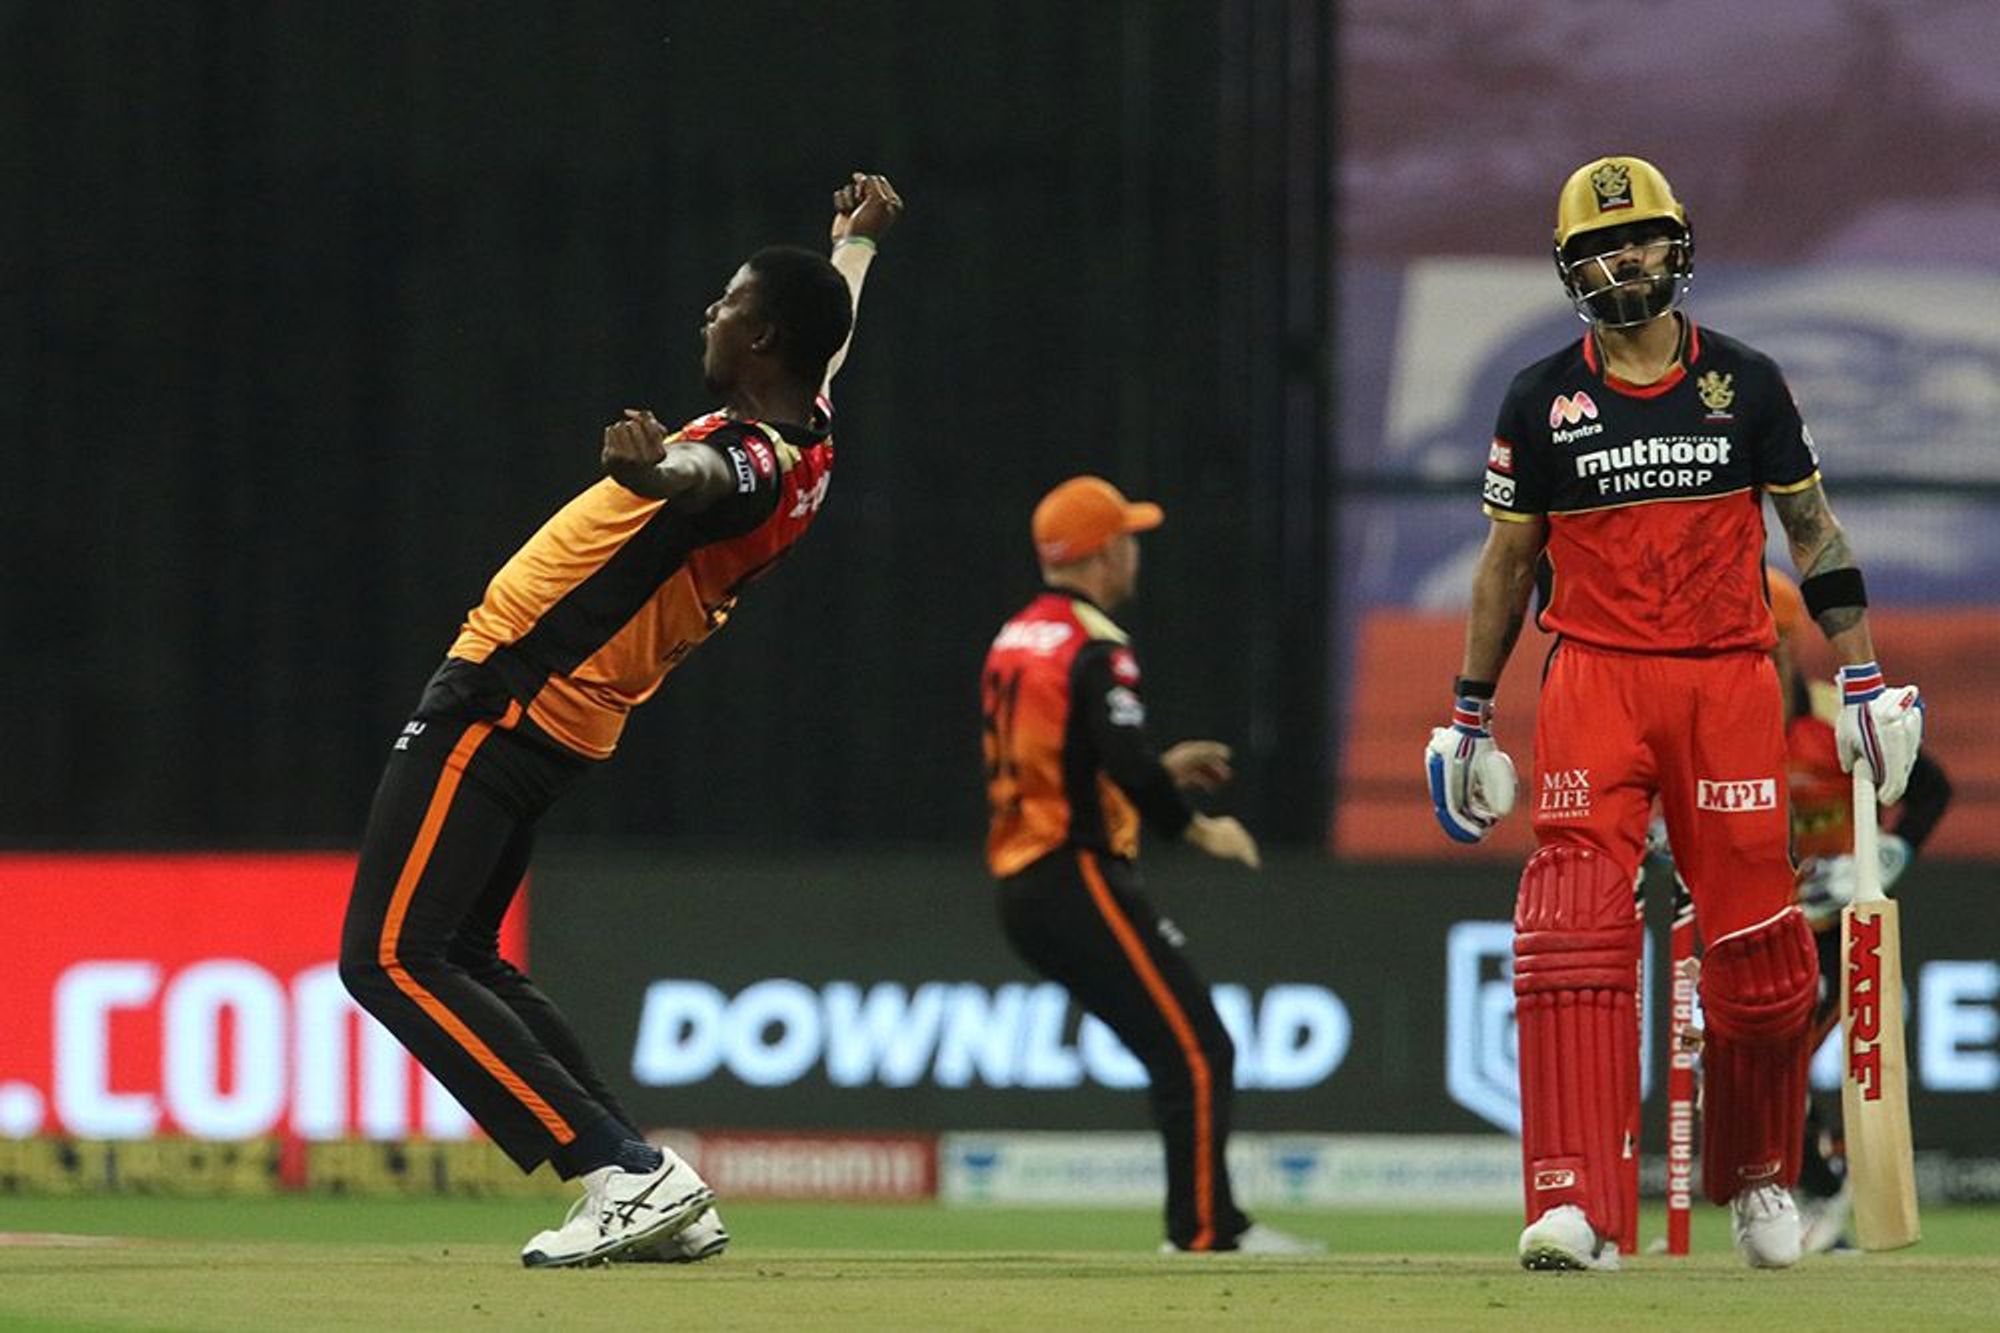 IPL 2020 | RCB’s batting ran out of steam towards the tournament’s back end, rues Simon Katich